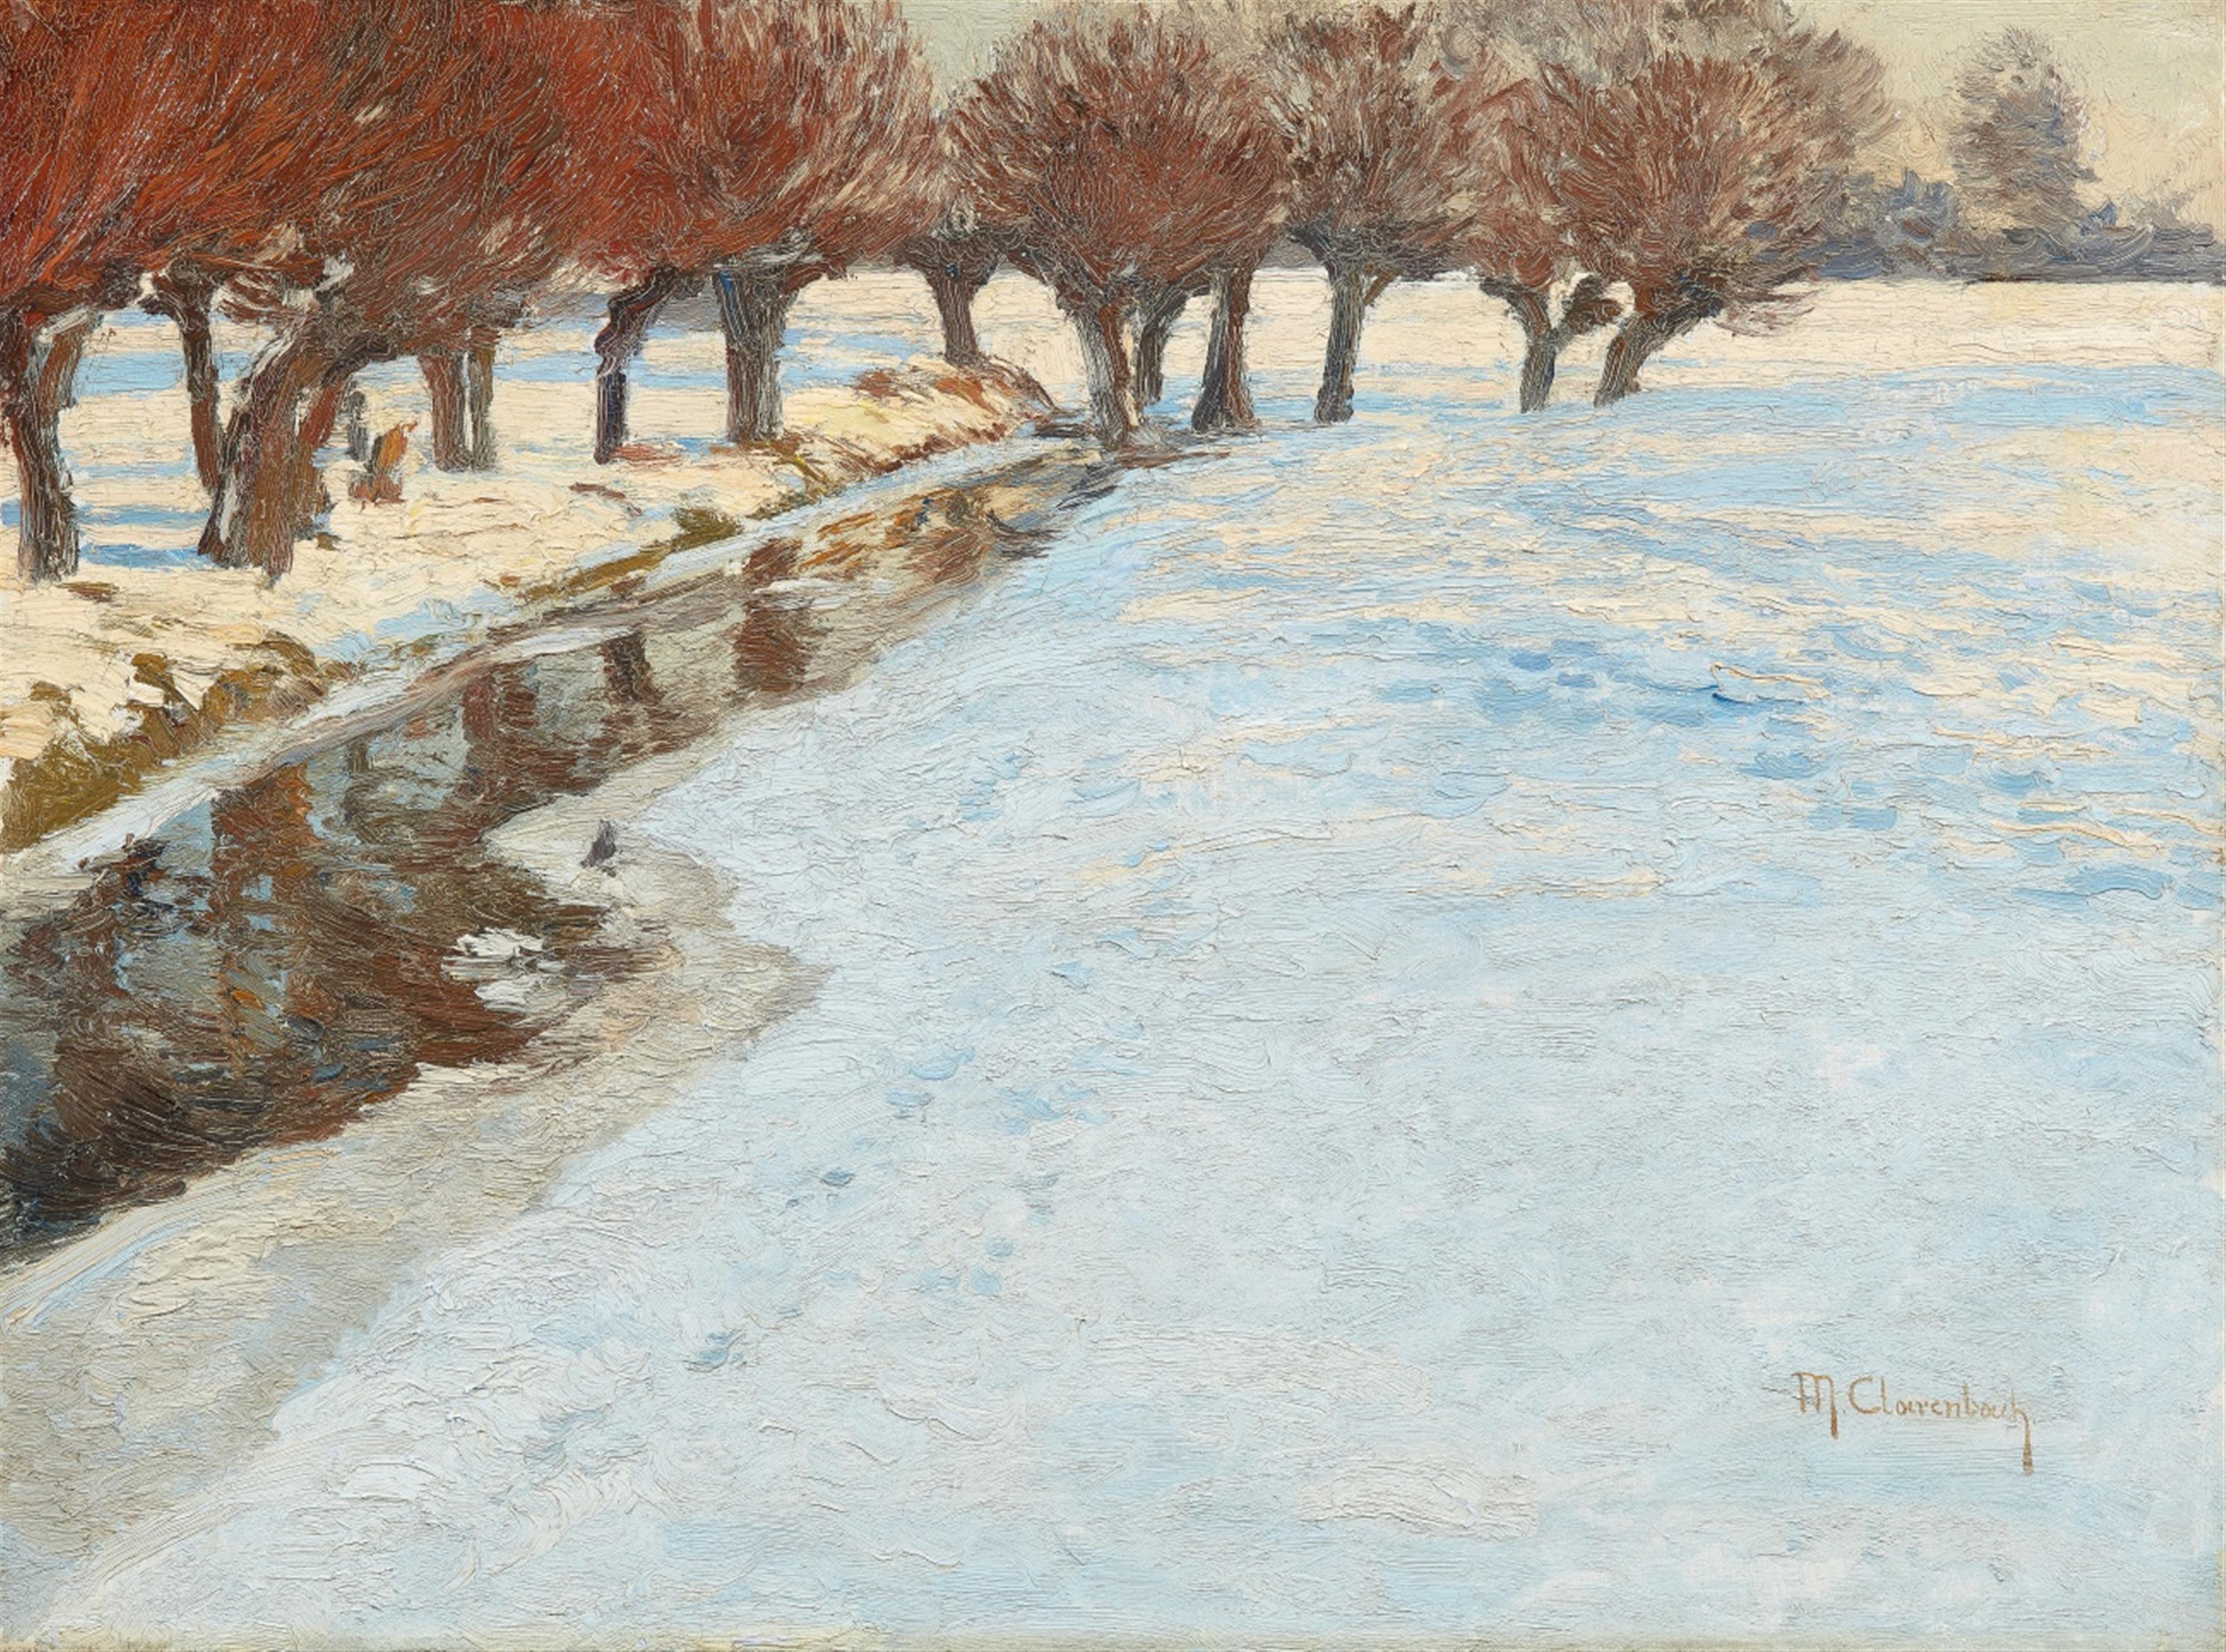 Max Clarenbach - Snowy Winter Landscape with Pollard Willows - image-1